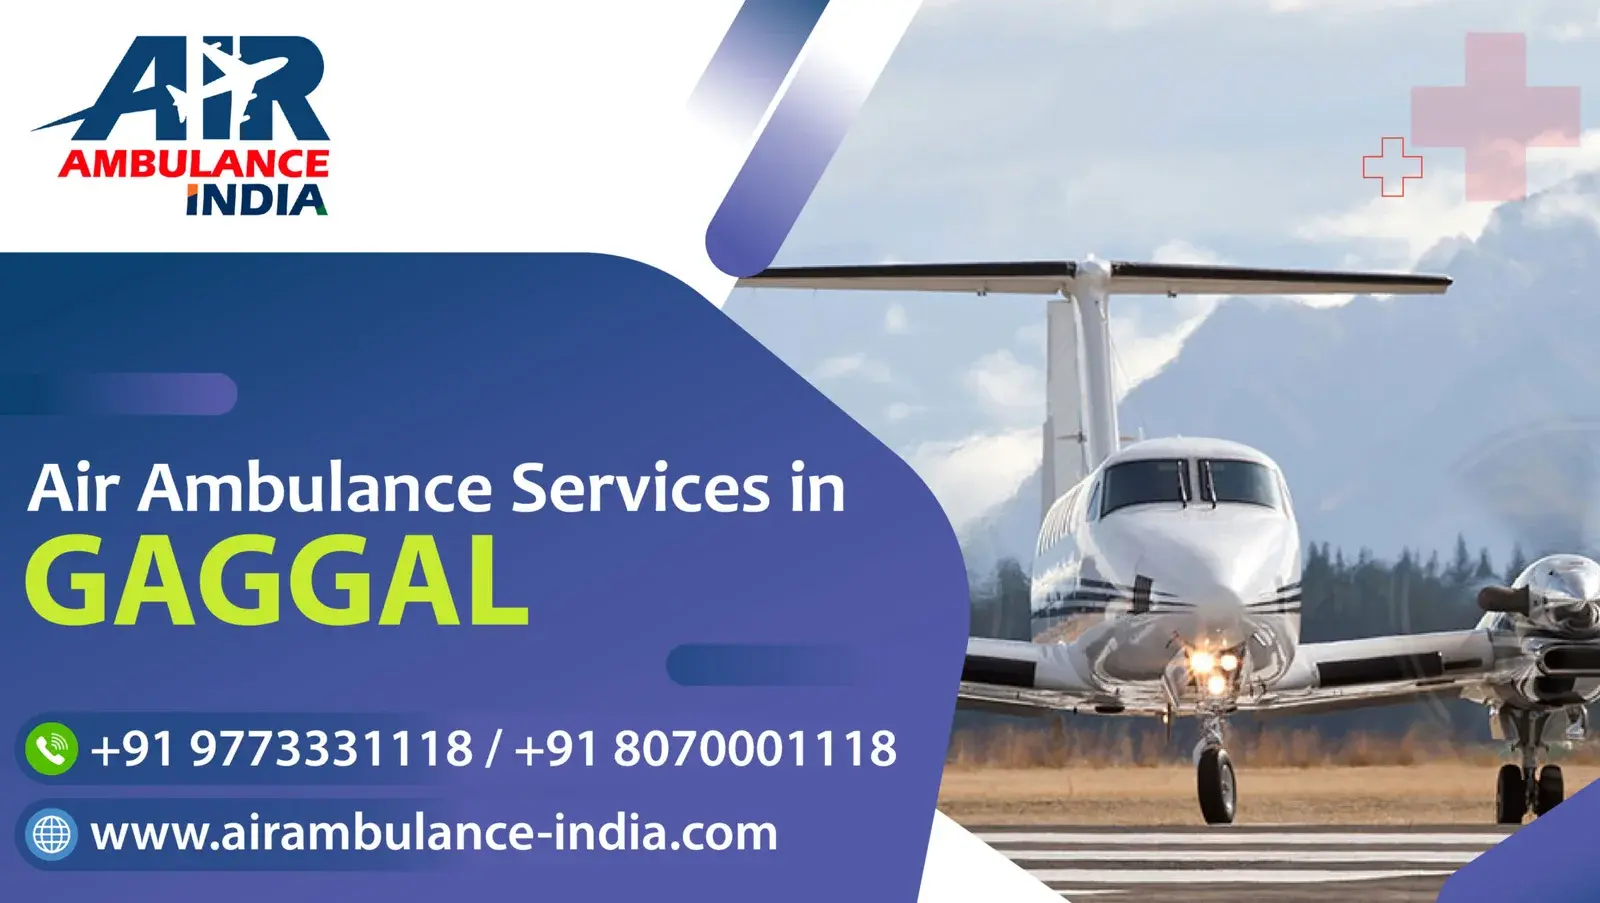 Air Ambulance Services in Gaggal